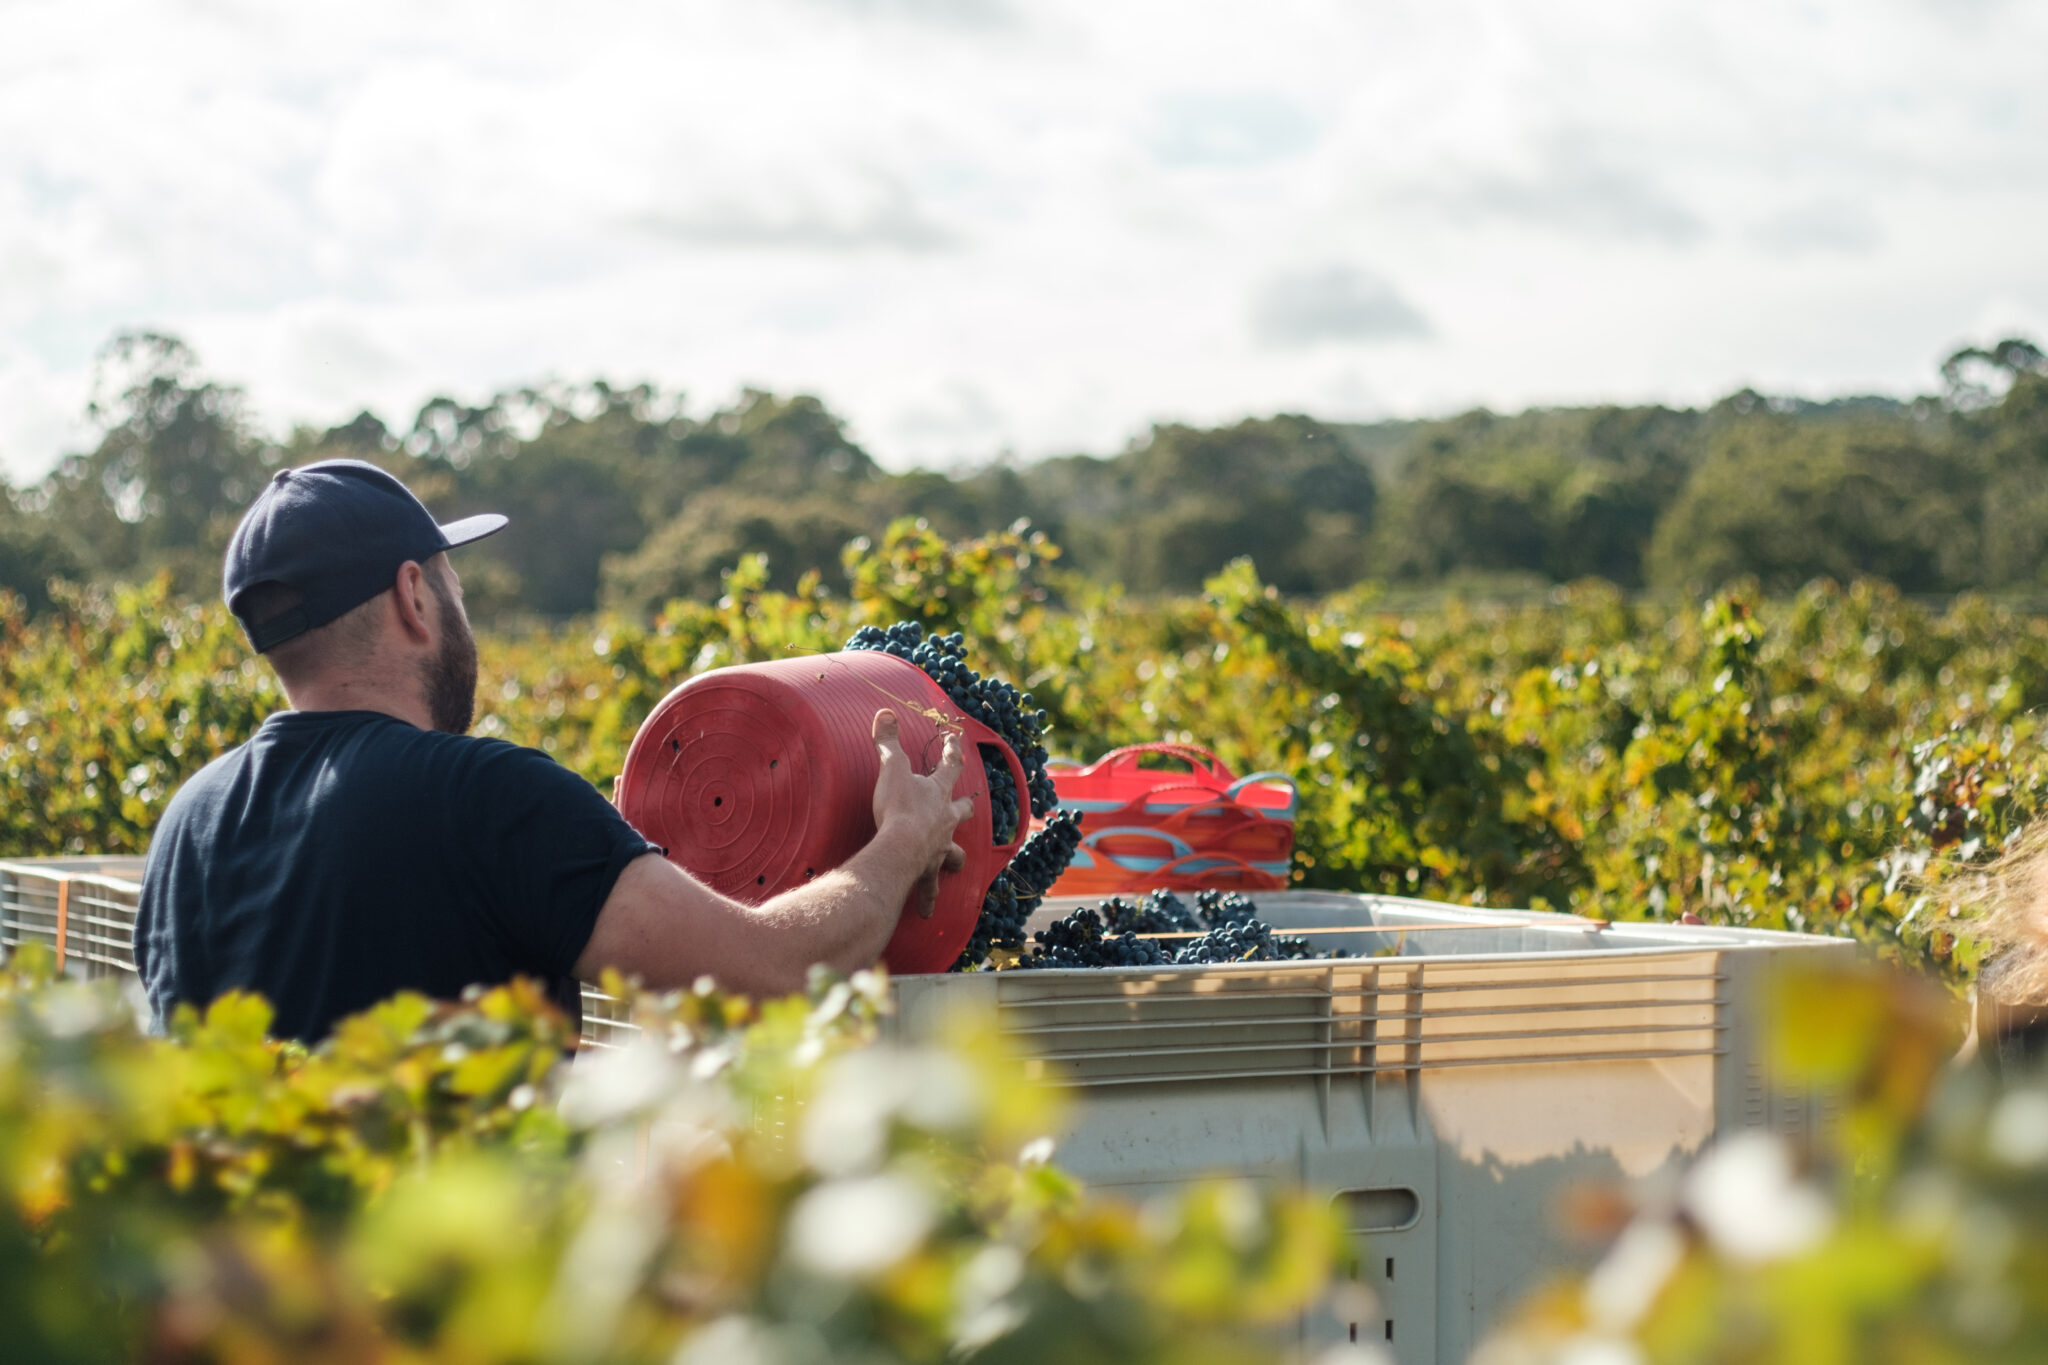 Loading grapes from the vineyard